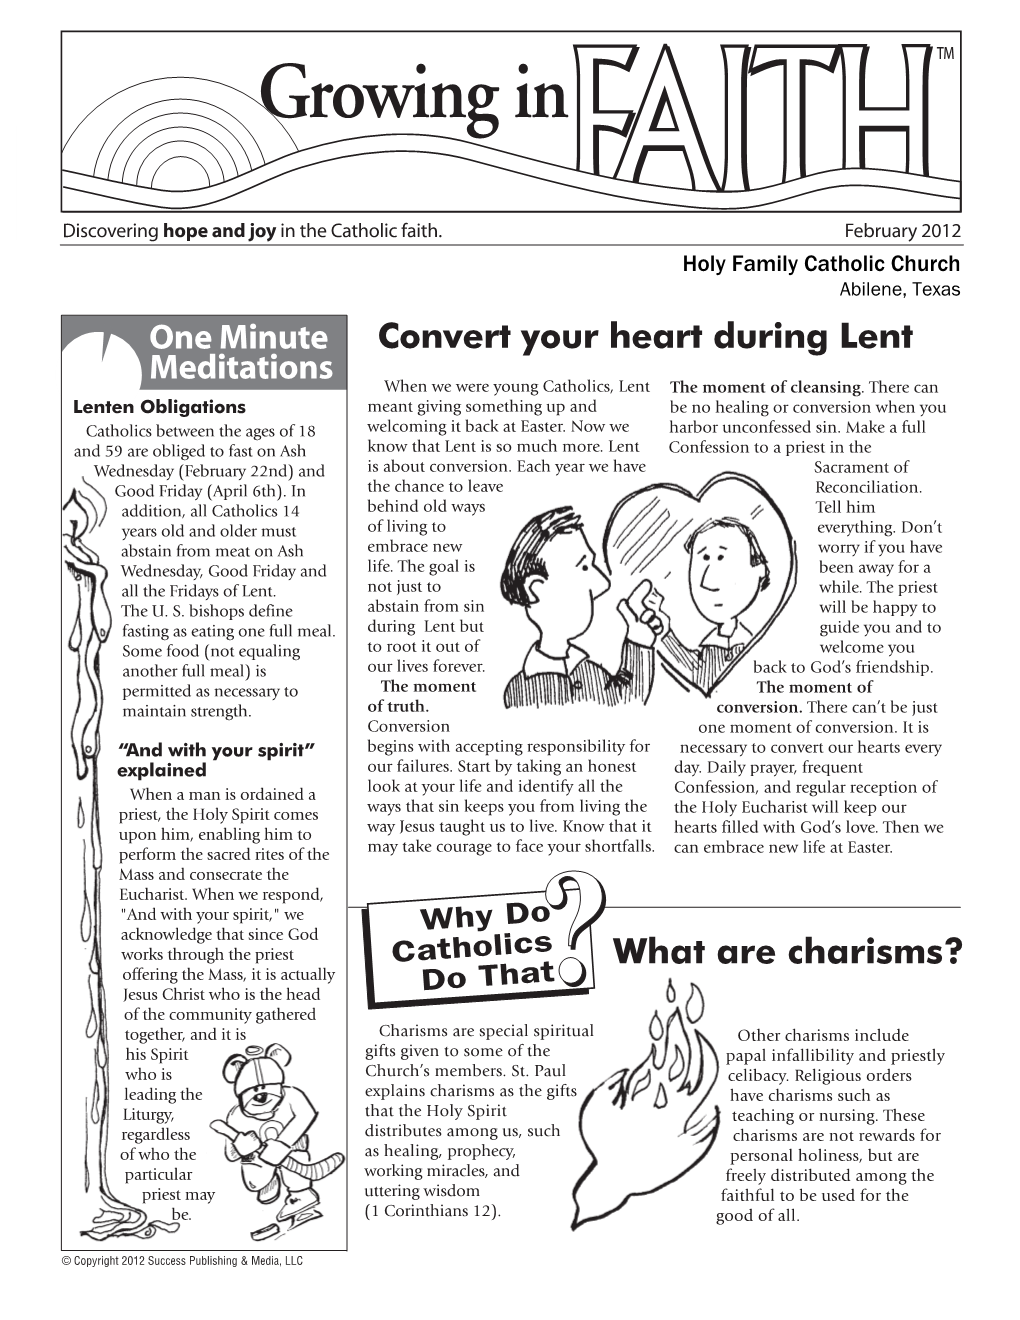 Convert Your Heart During Lent What Are Charisms?